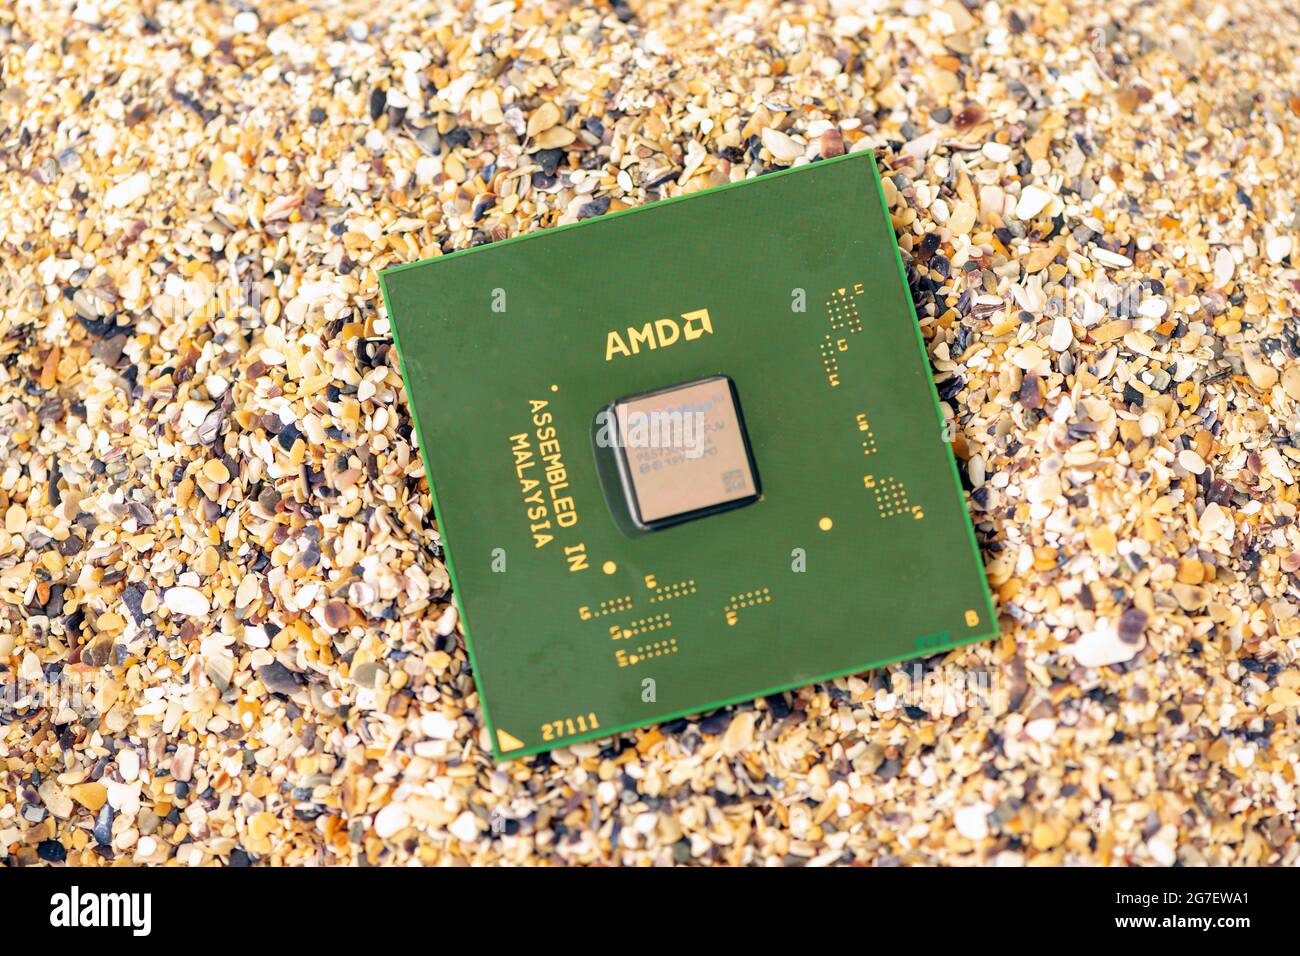 Timisoara, Romania - October 18, 2020: Close-up of an AMD Athlon XP 1800+ AX1800DMT3C processor, 1800 MHz, socket A with sand in the background. Stock Photo